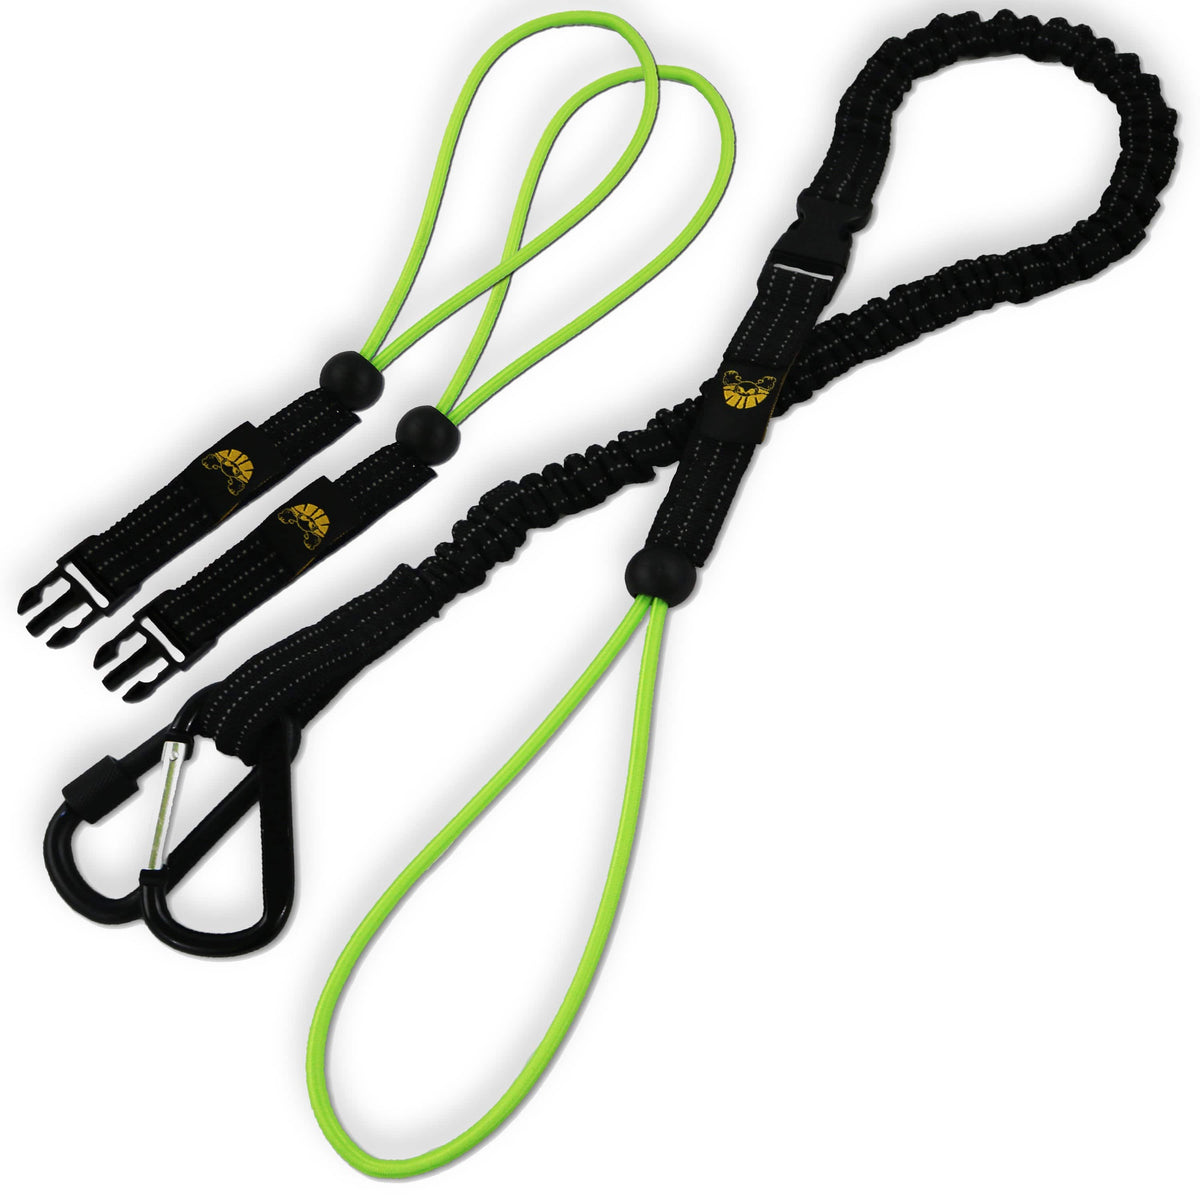 KwikSafety OCTOPUS Heavy Duty Tool Lanyard w/ Detachable Straps and  Carabiners - Model No.: KS7902